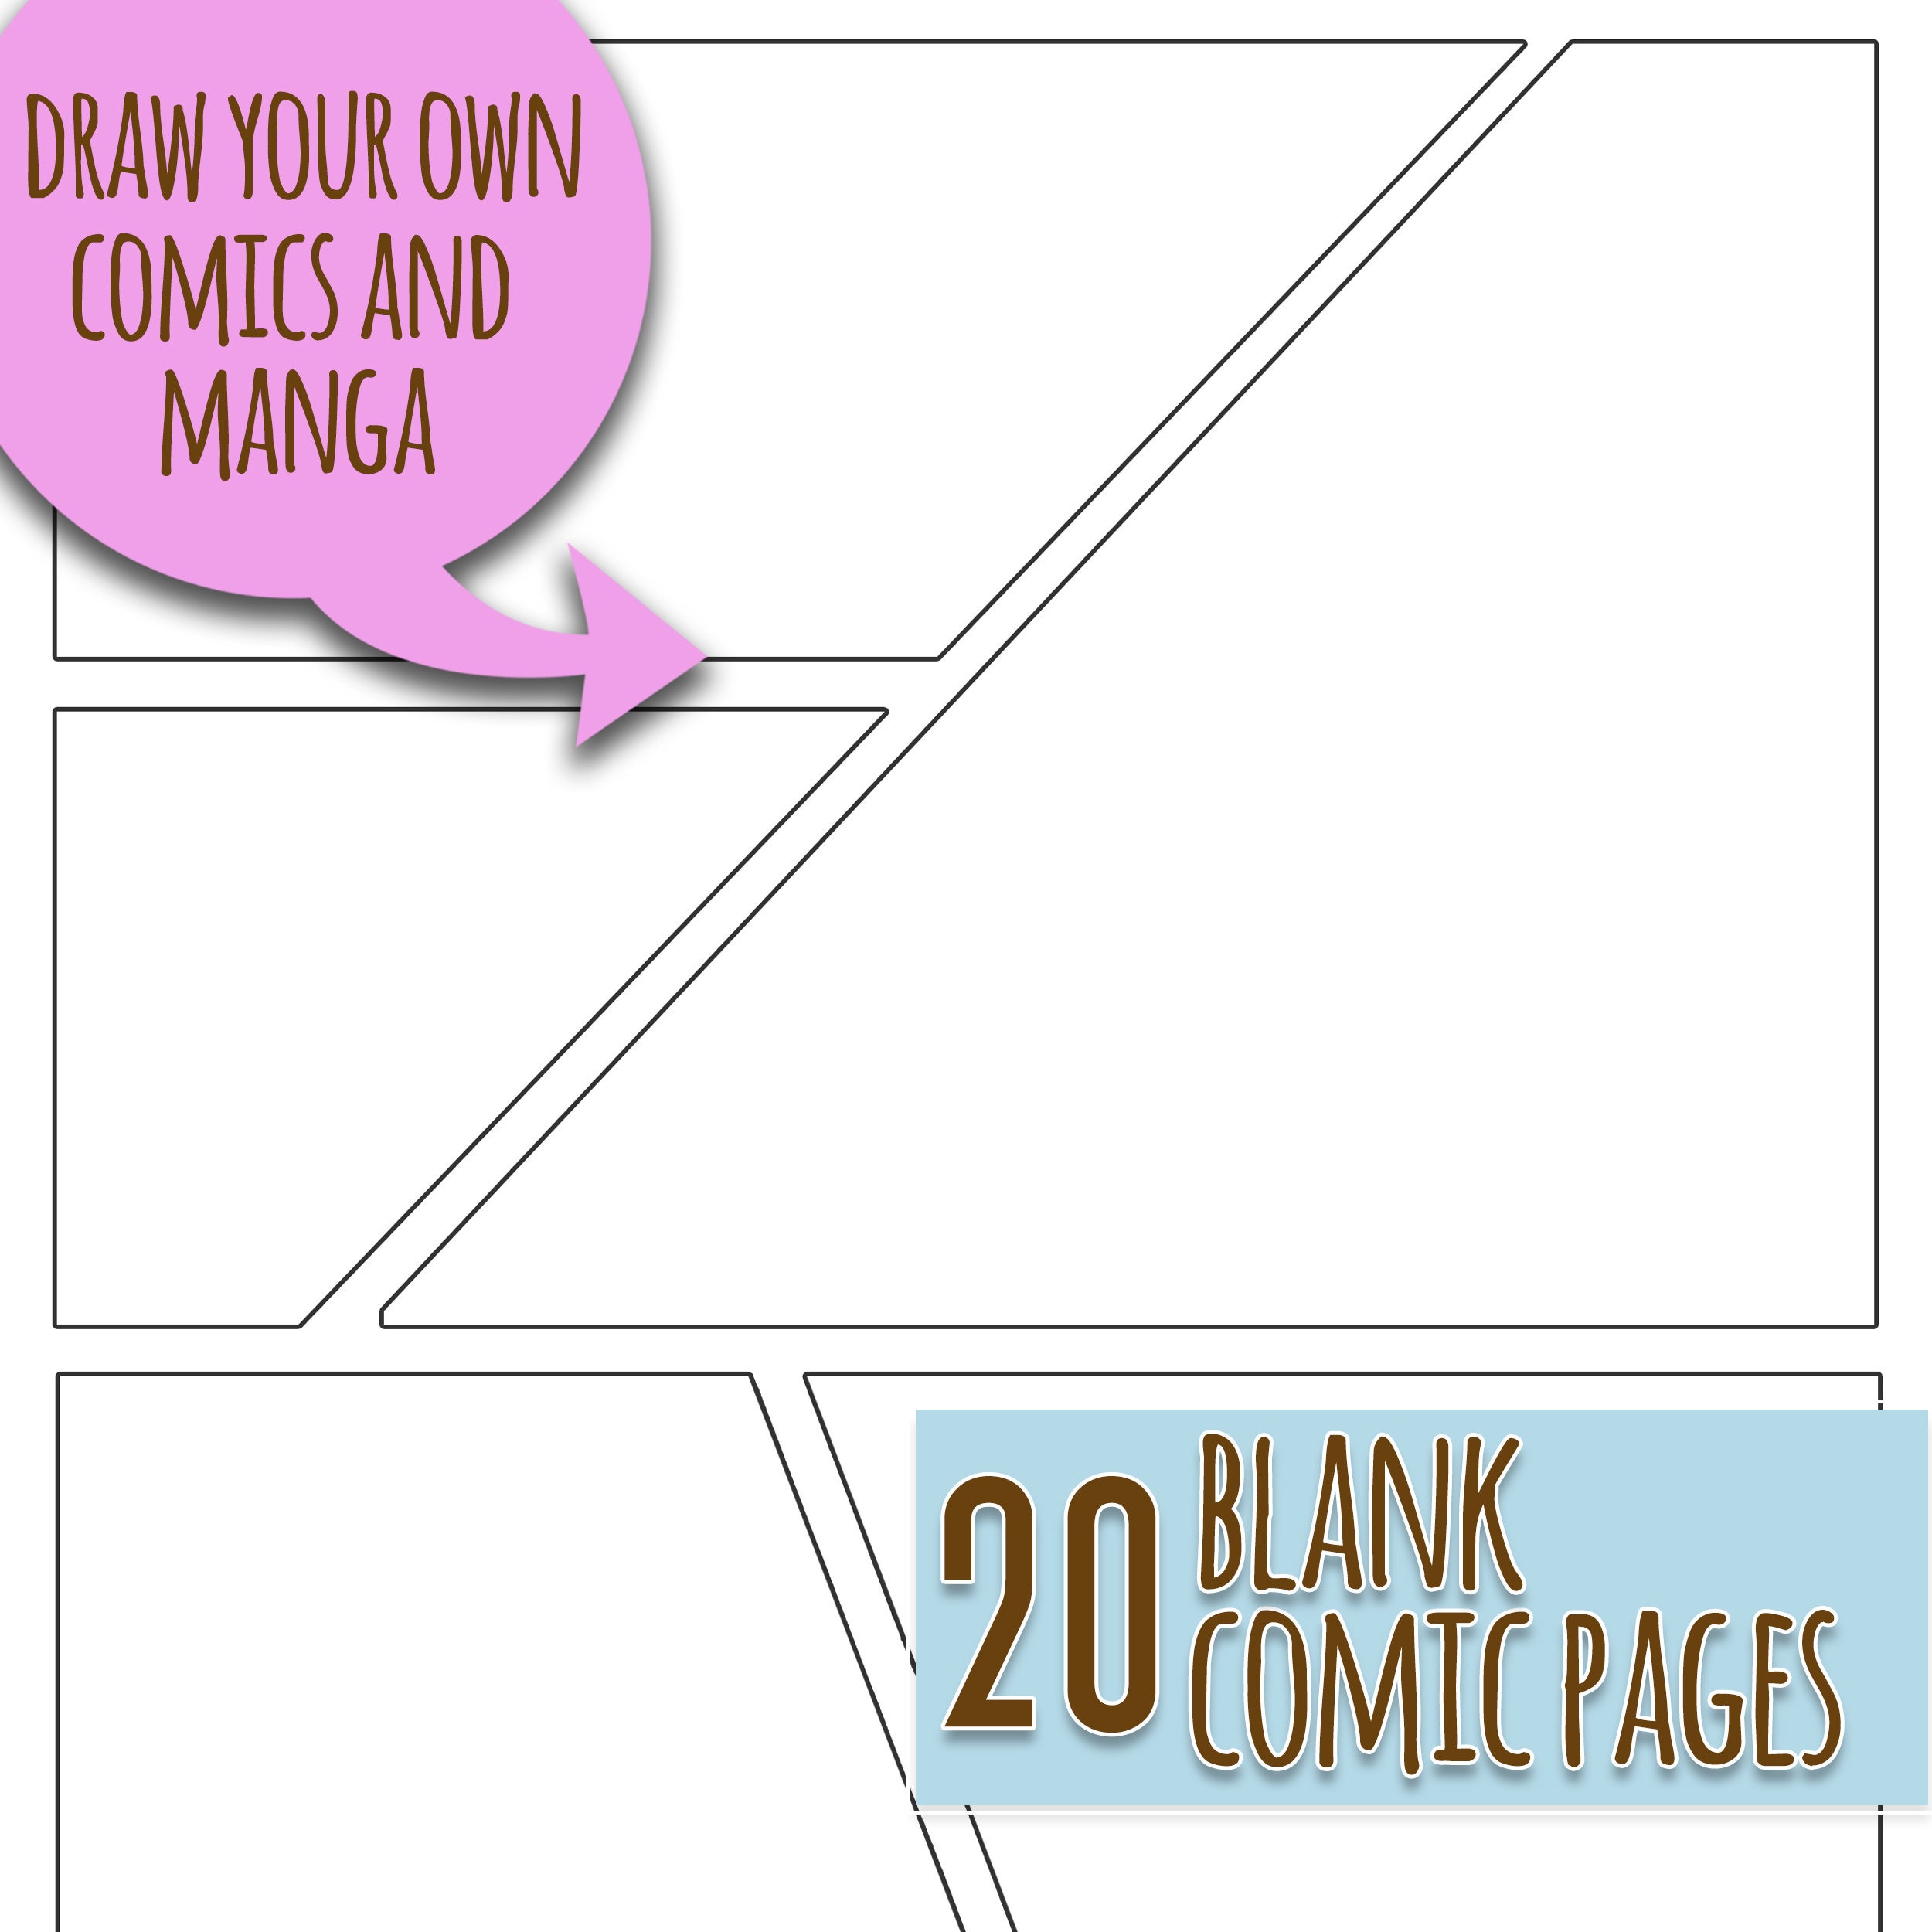 Blank Manga Comic Book: Create Your Own Manga & Anime Comics - 8.5x 11 -  PREMIUM QUALITY 120 Pages Manga Template Filled With Different Mood Frames  by Manga Art Supplies